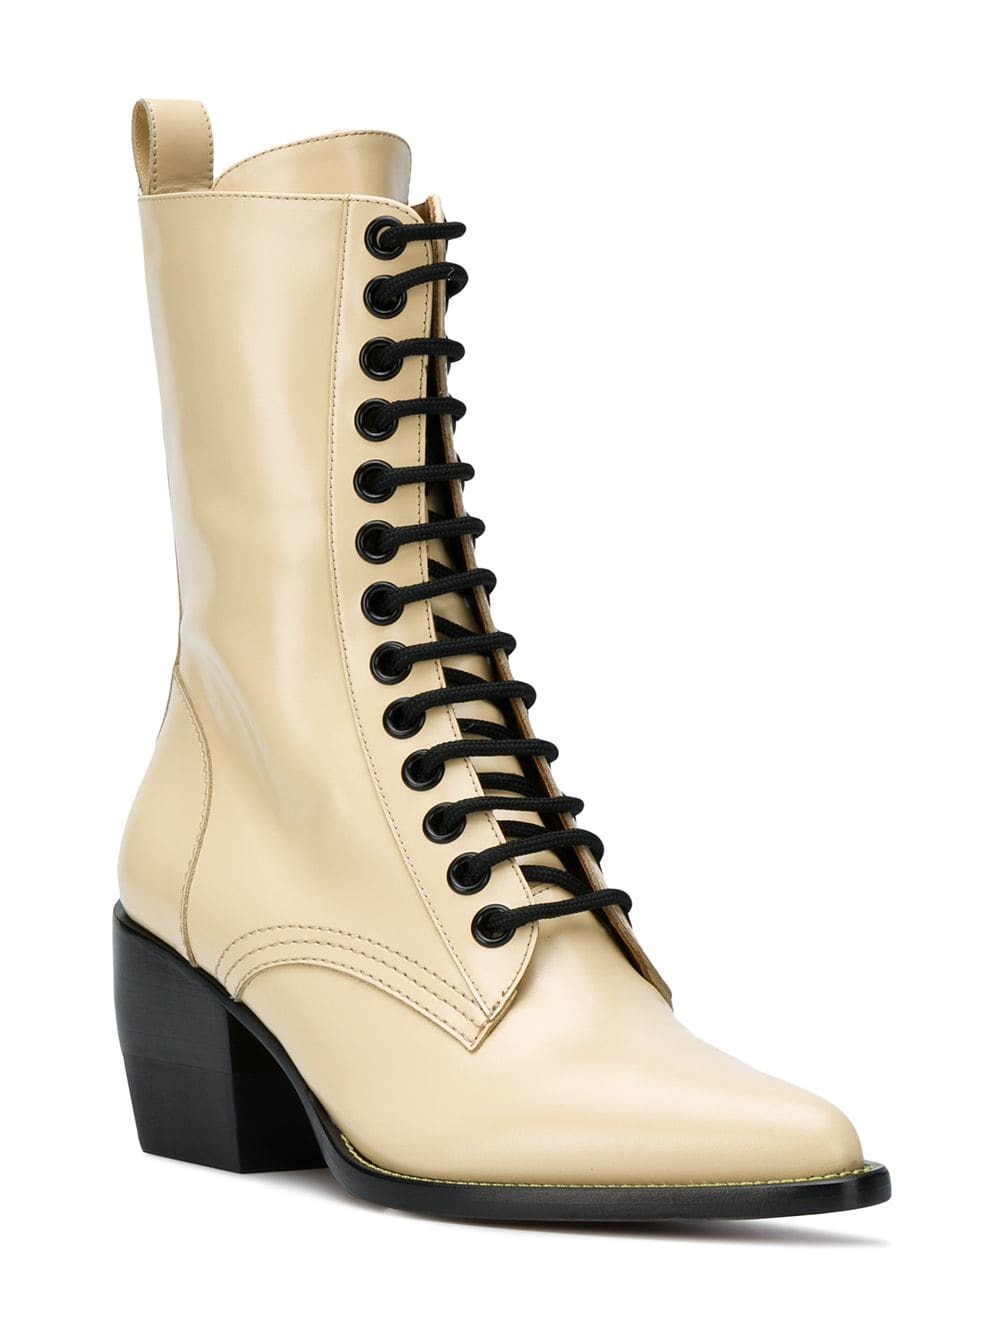 Chloé Lace Fastened Boots, $1,178 